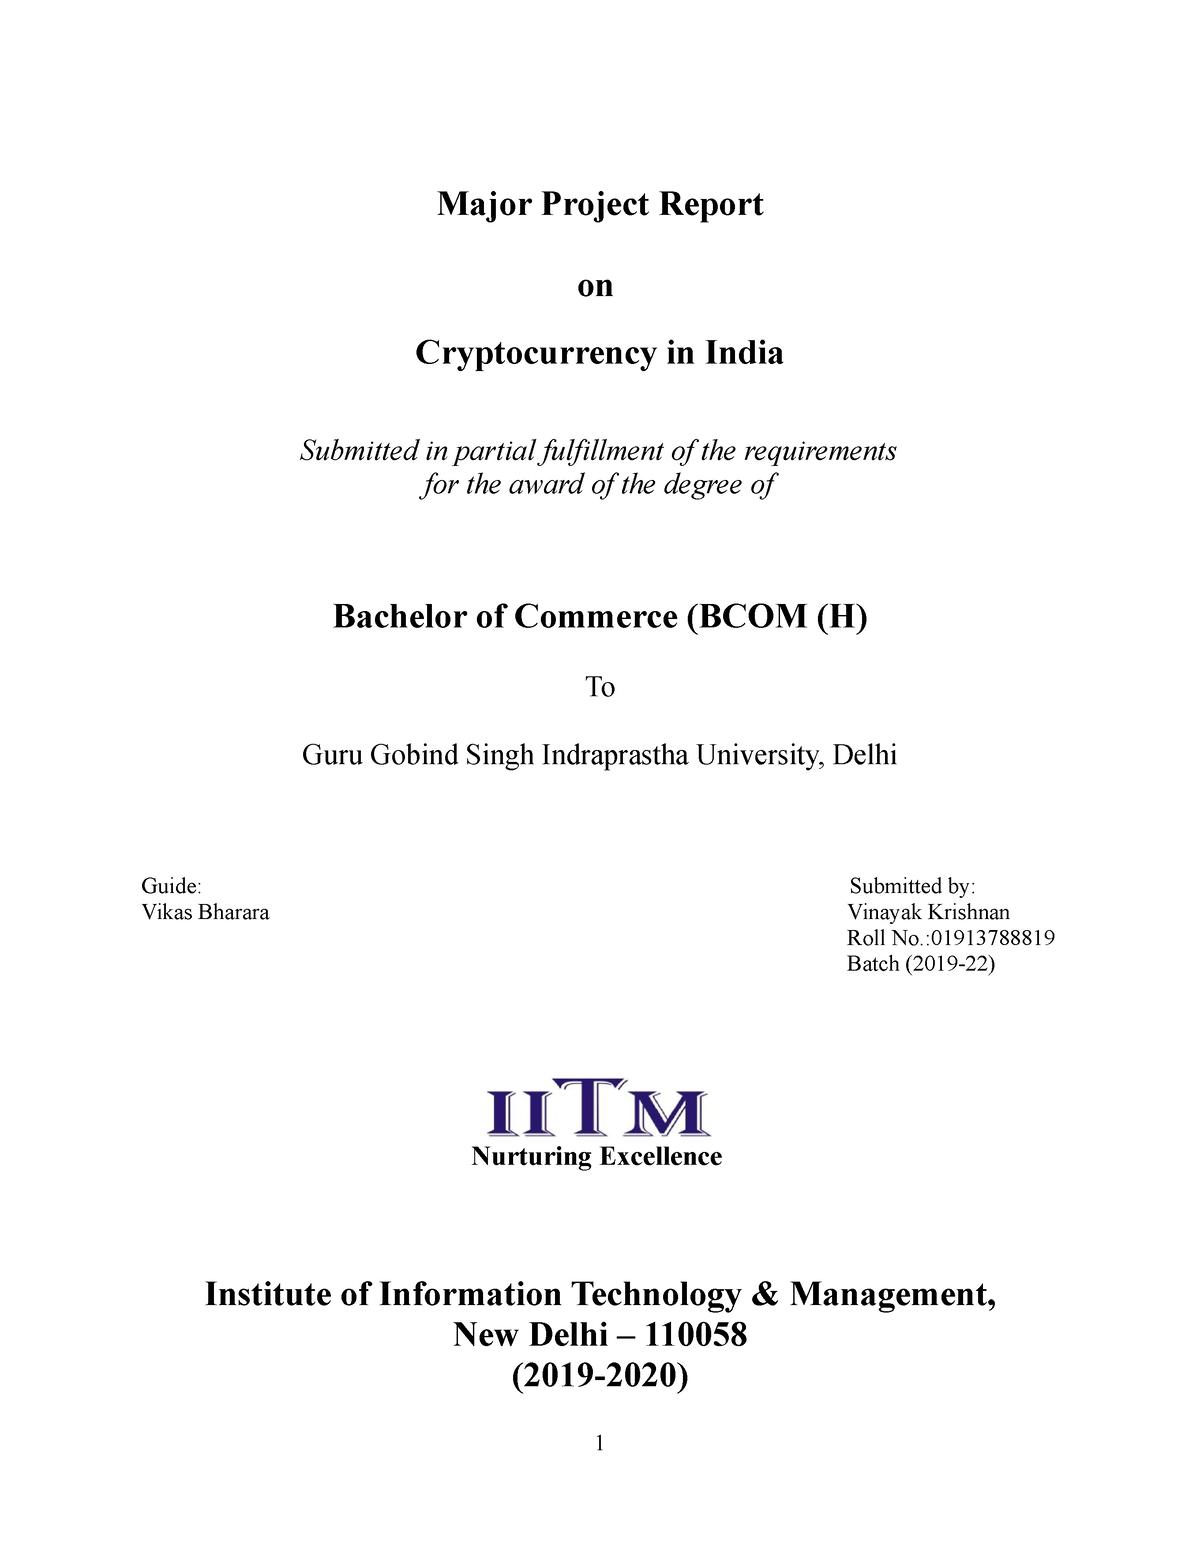 objectives of cryptocurrency research paper